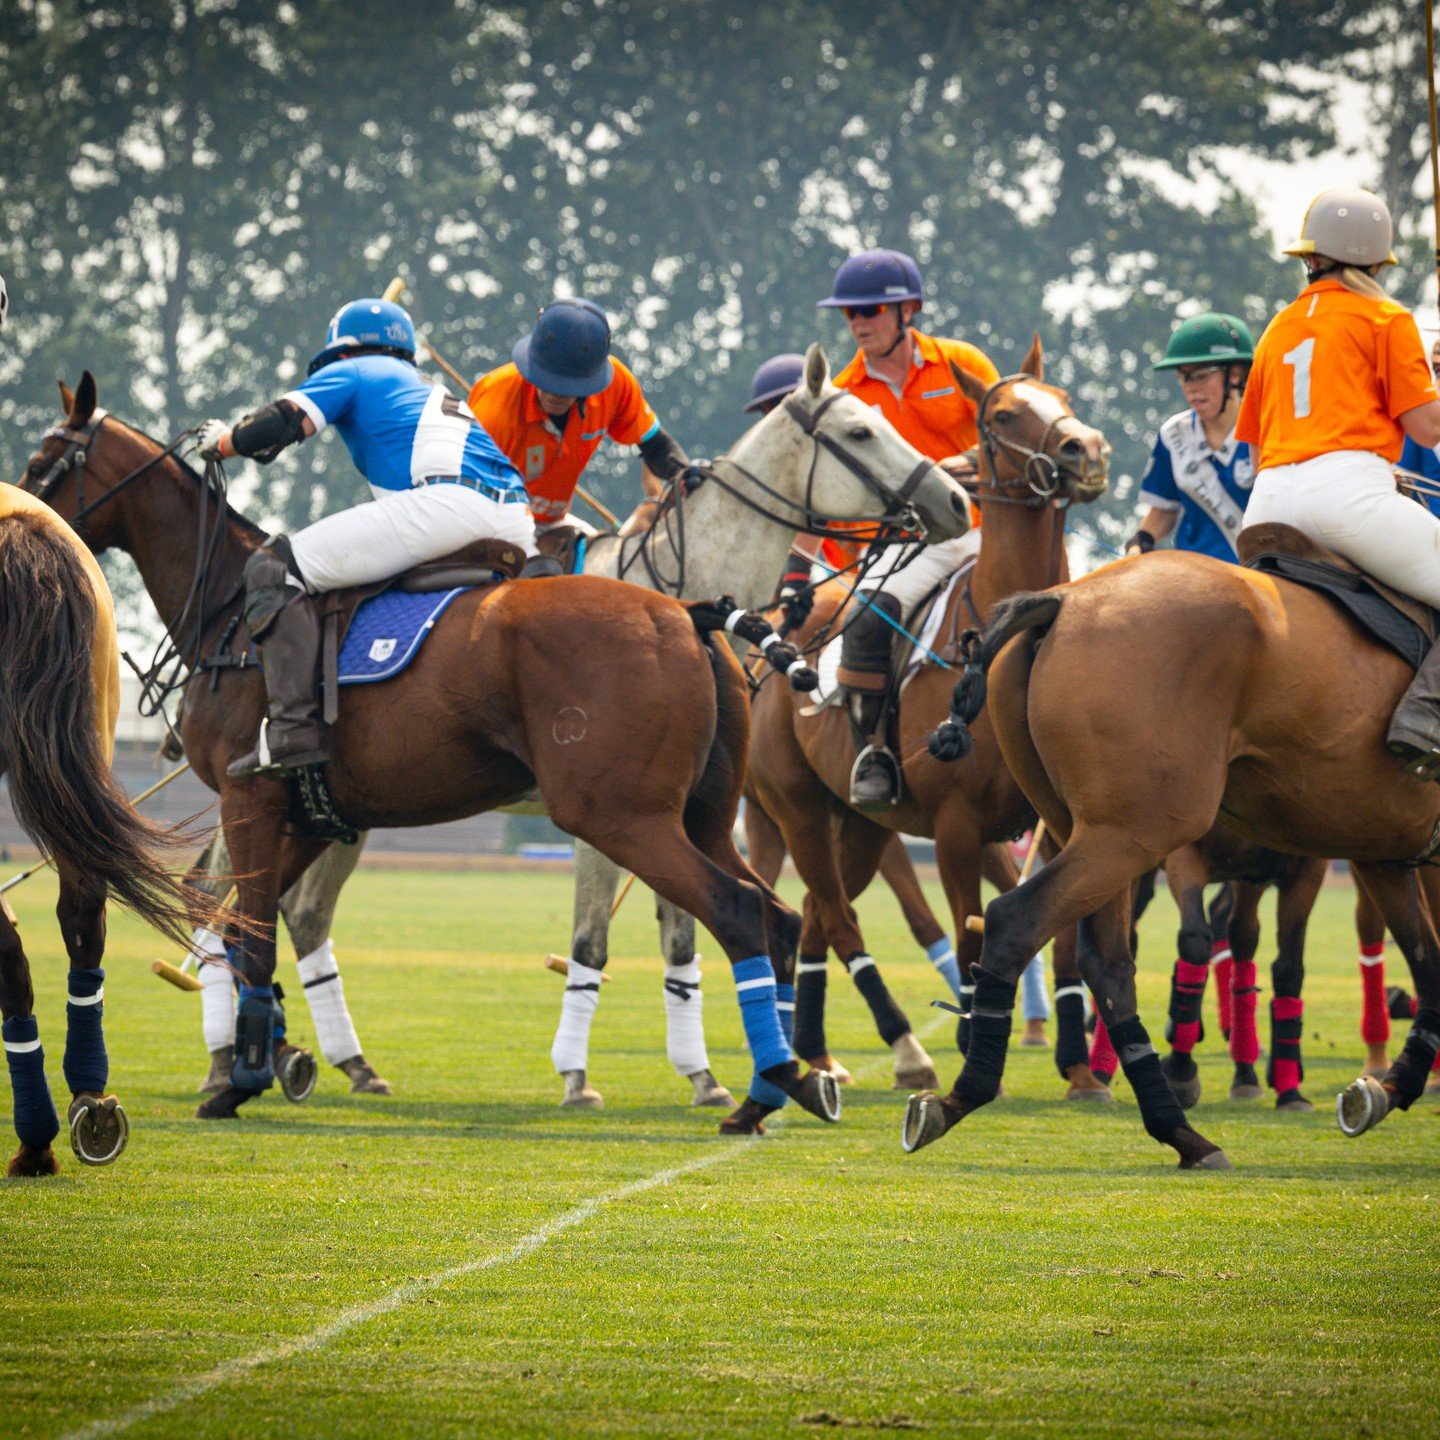 Early Bird Tickets on Sale for the Kelowna Polo Classic 2024! Just a few Left, so don't hesitate. June 29th 11am - 6pm. This year's ticket includes tokens for the Valley First Tasting Tent promoting &quot;Women in Wine&quot;, catered small plates all